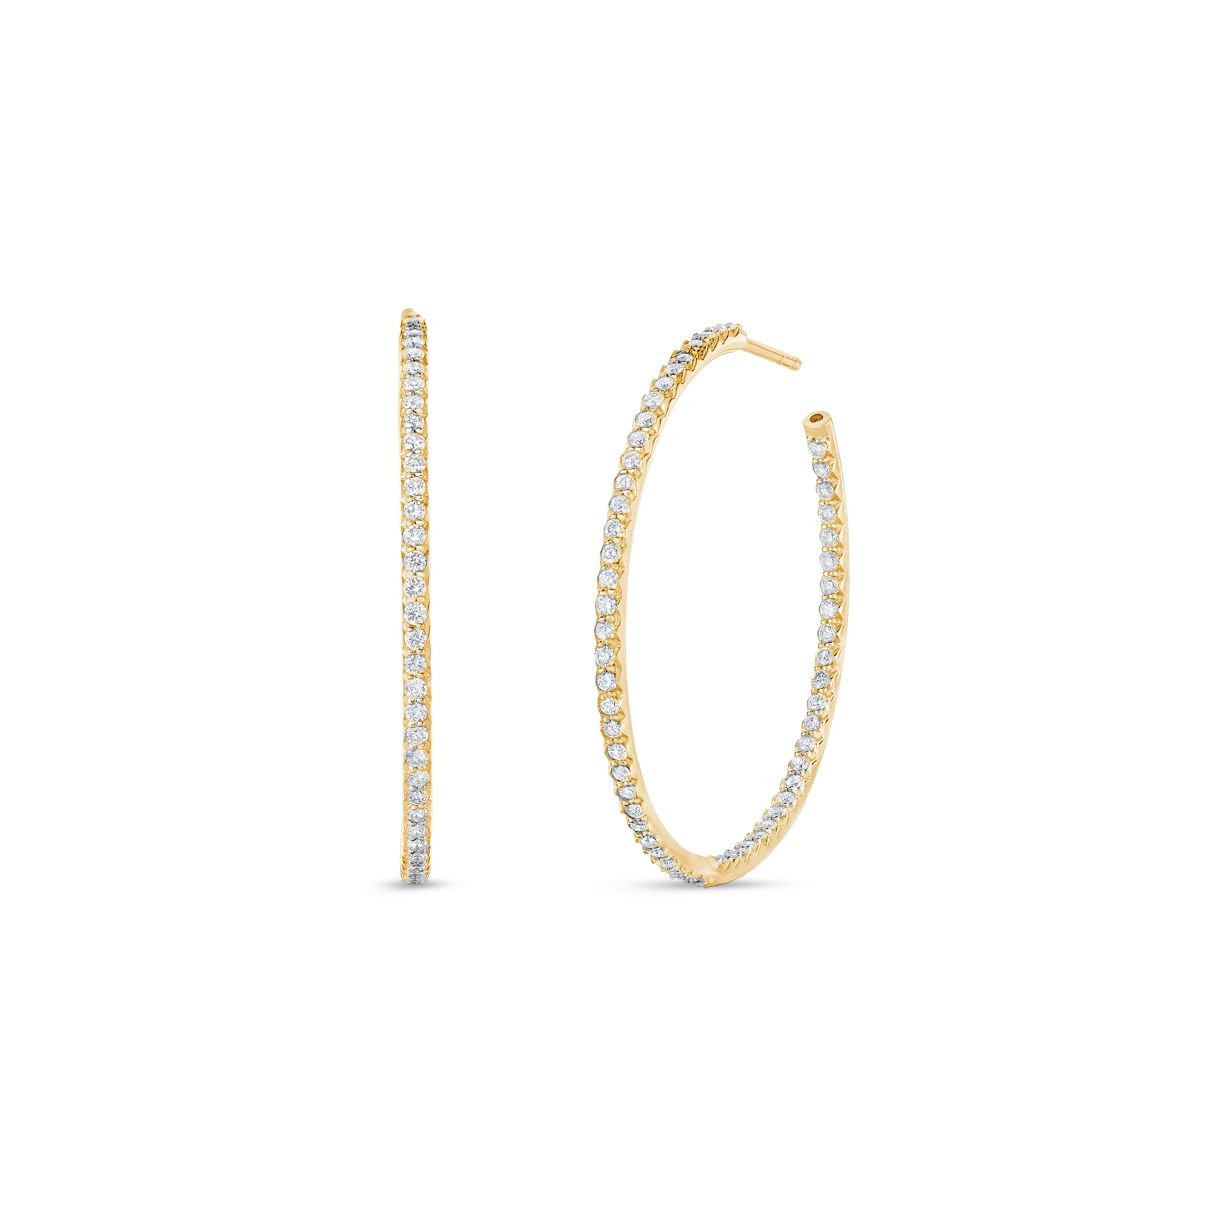 18K YELLOW GOLD DIAMOND INSIDE OUT HOOPS 1.10CT